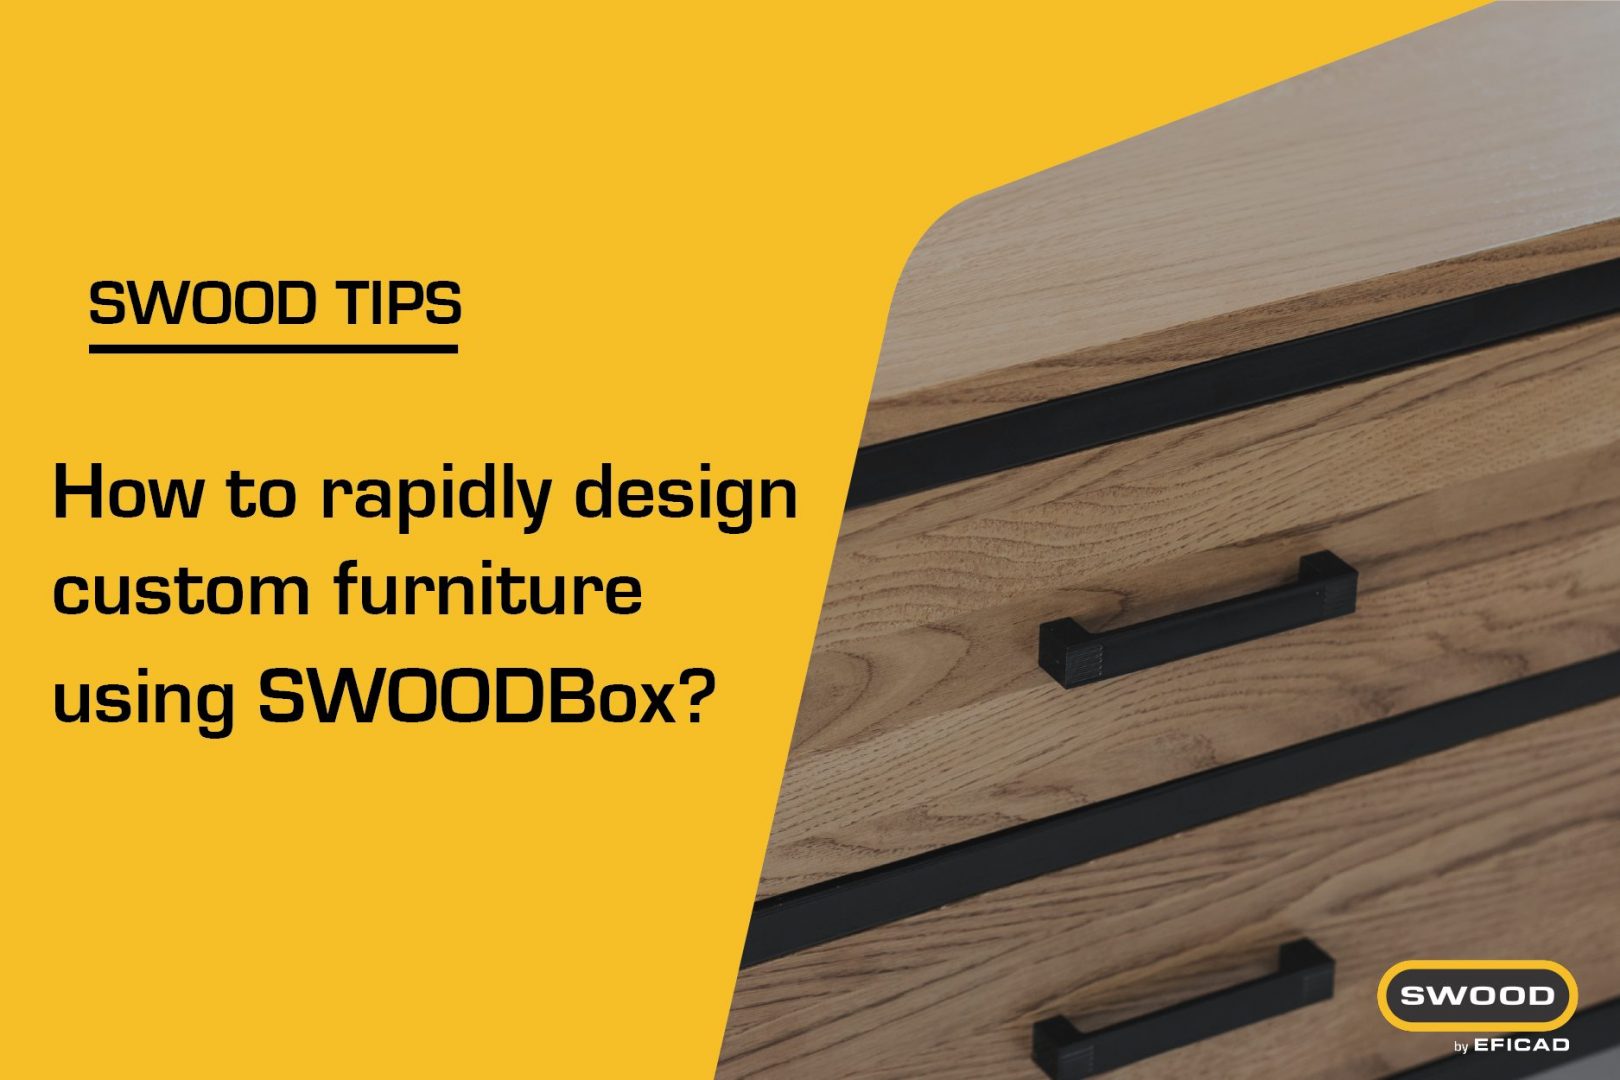 How to rapidly design custom furniture using SWOODBox?